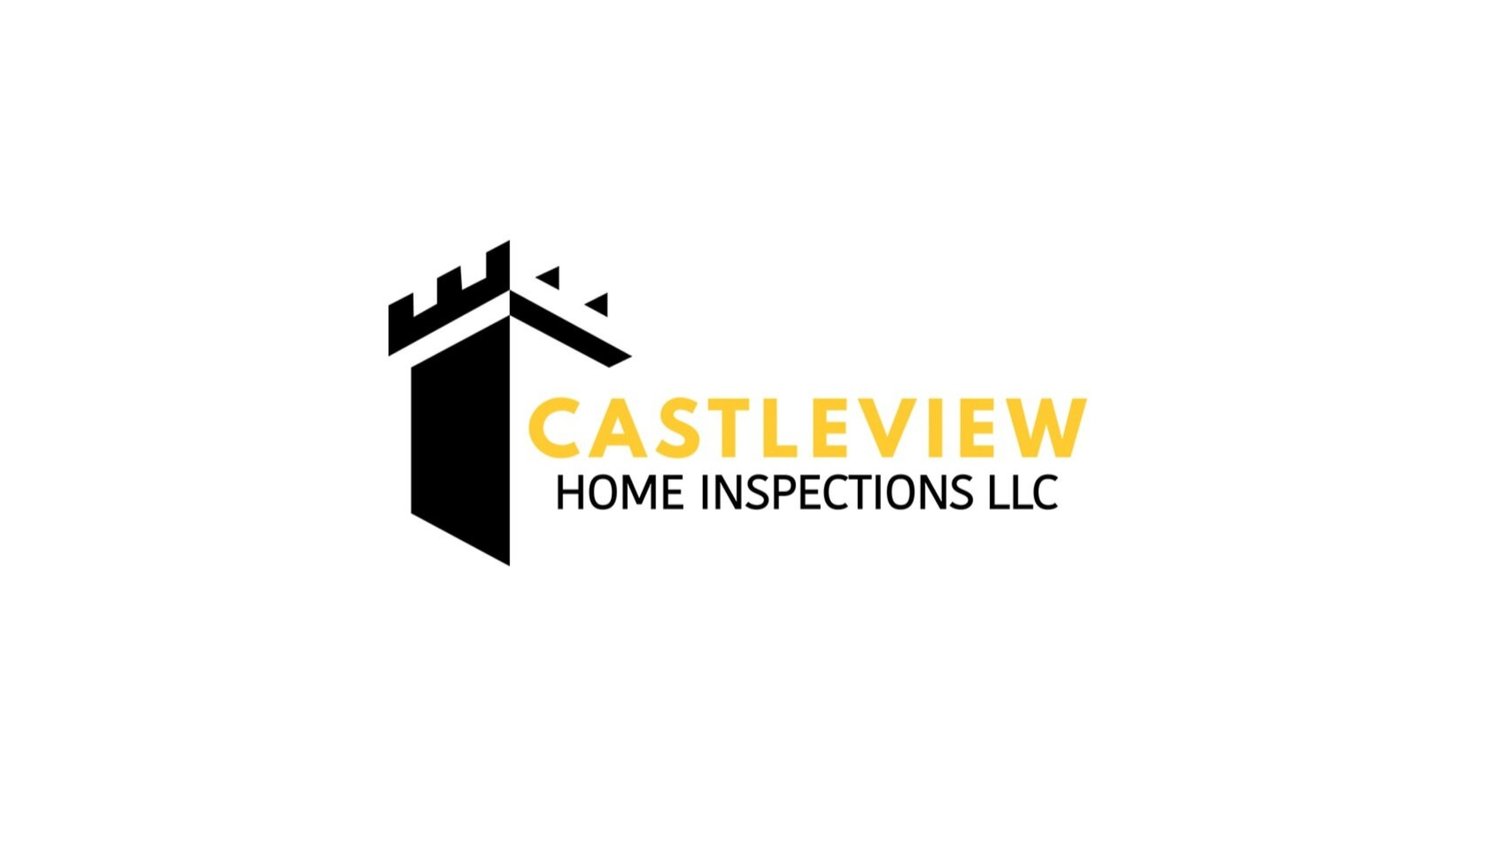 Castleview Home Inspections, LLC